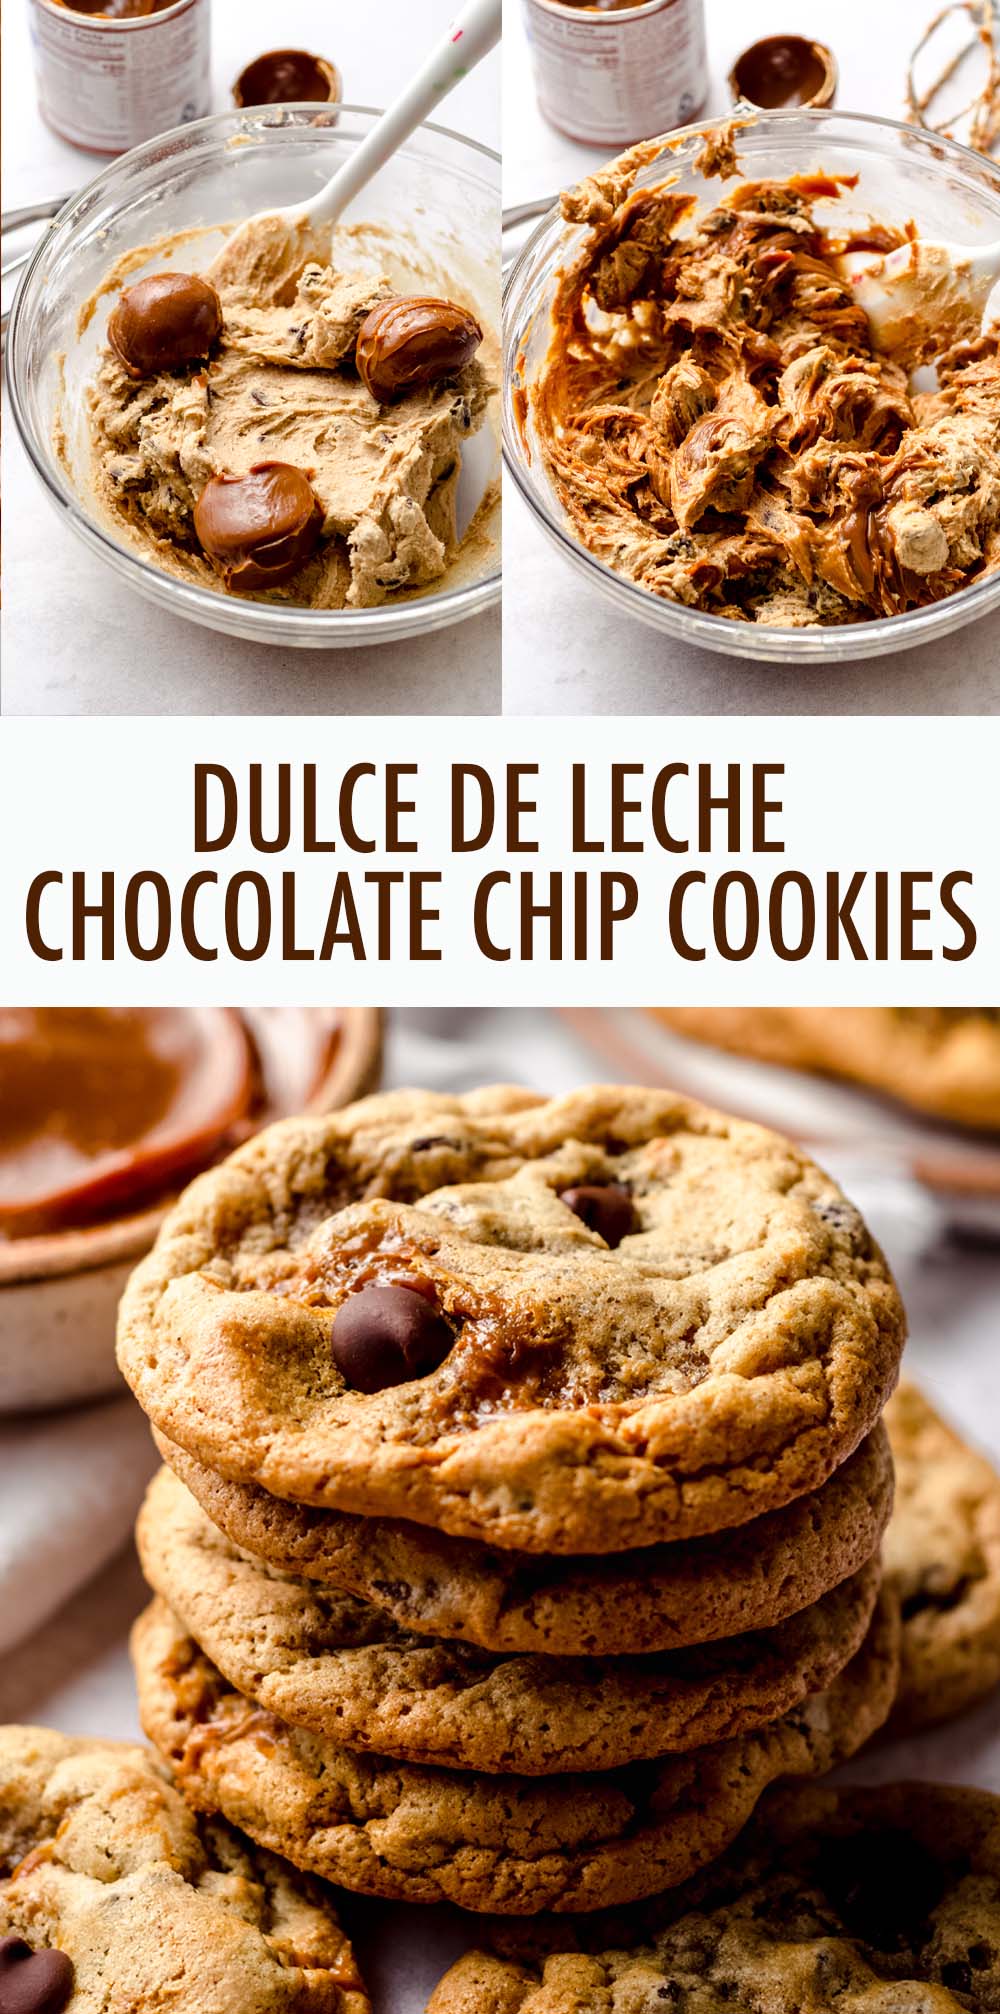 Turn traditional chocolate chip cookies into something with a little extra pizzaz by swirling them with dulce de leche! This is a no chill cookie recipe that yields gooey and chewy cookies every time. via @frshaprilflours